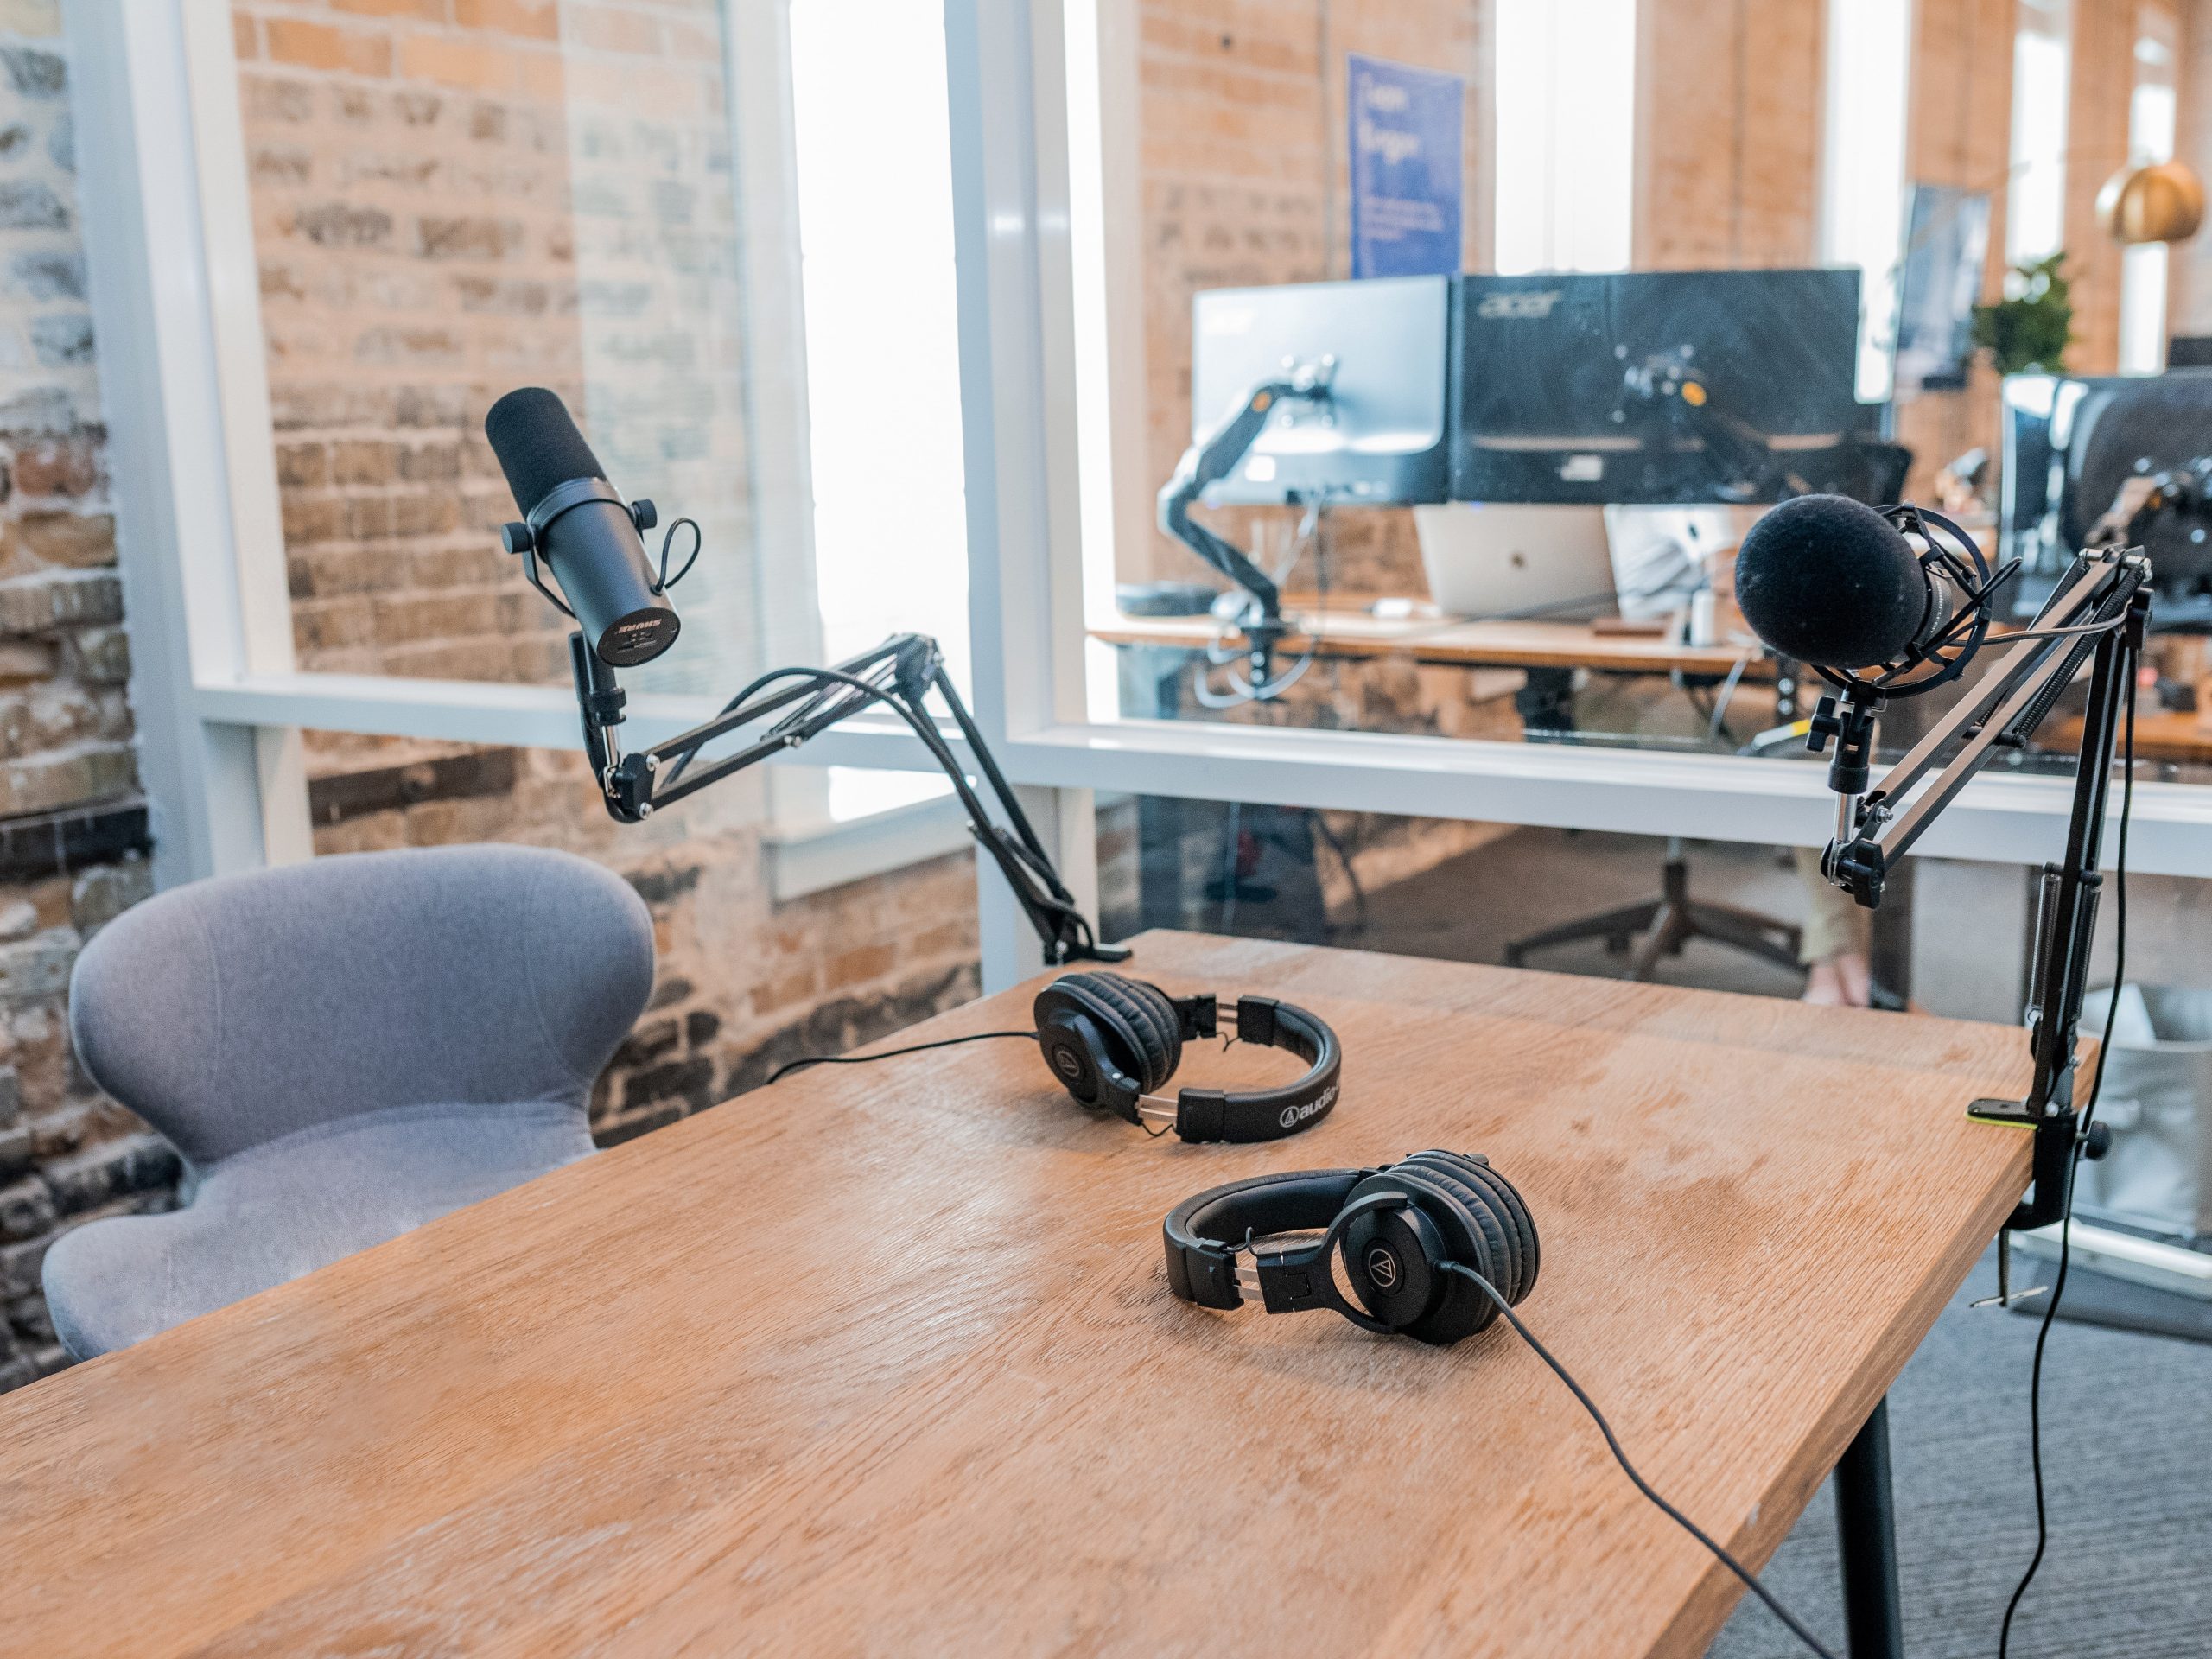 Should your company start a podcast